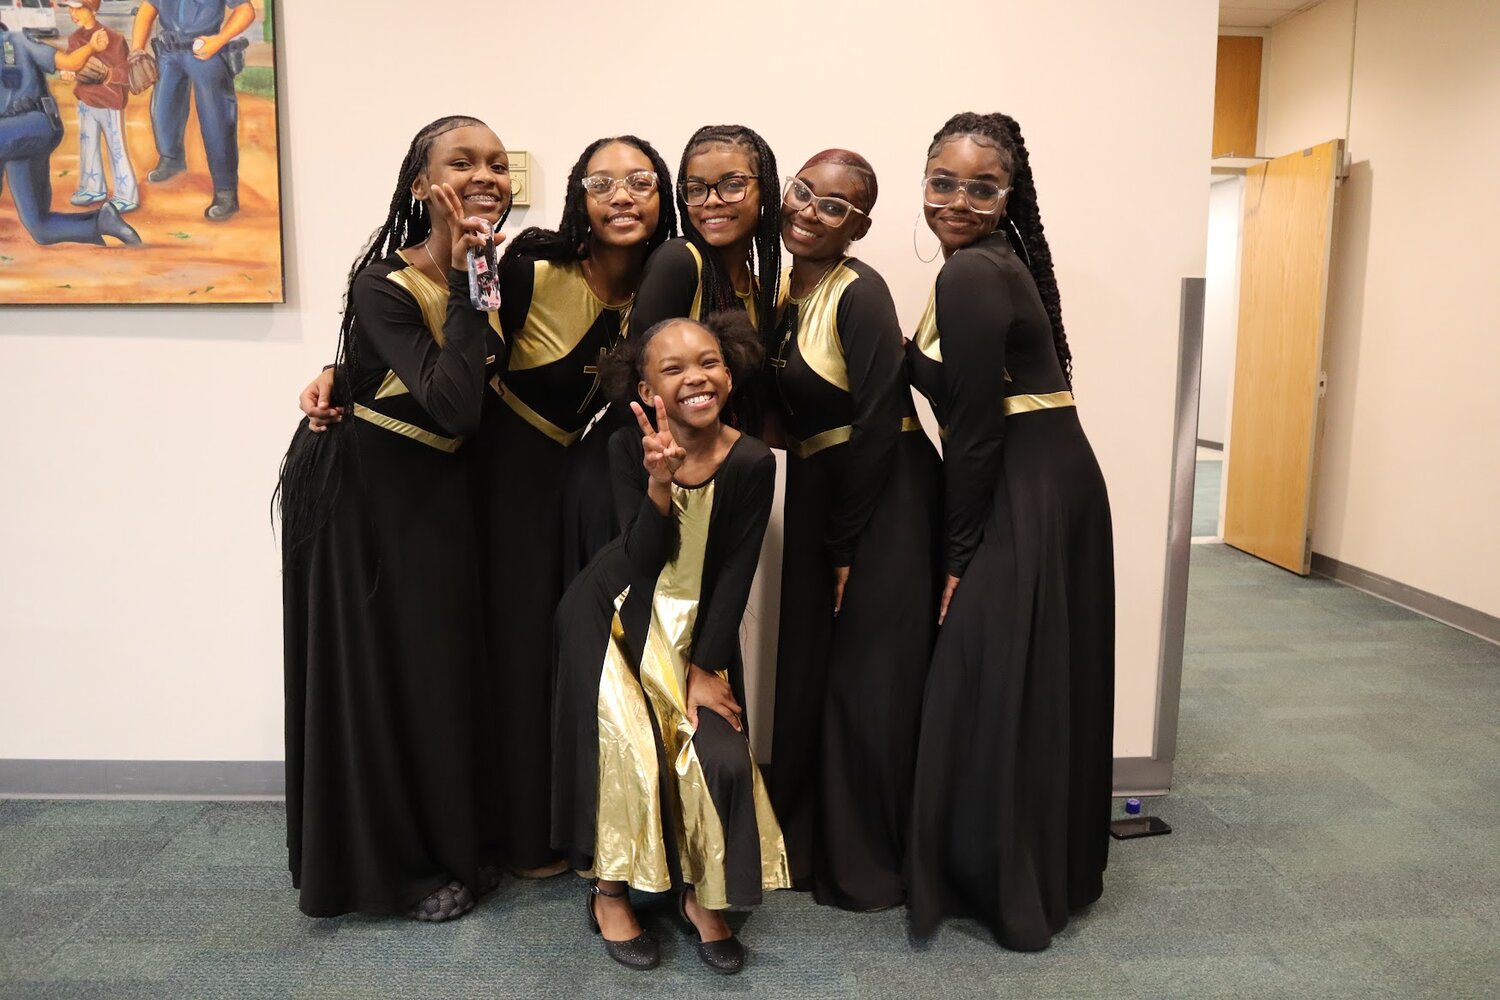 The Daughters of Judah (from left) Nyiemah Price, Nakiyah Robinson, Neveah Price, Jade Coffey, Chanel Lott, and Nadiyah Robinson (in front).